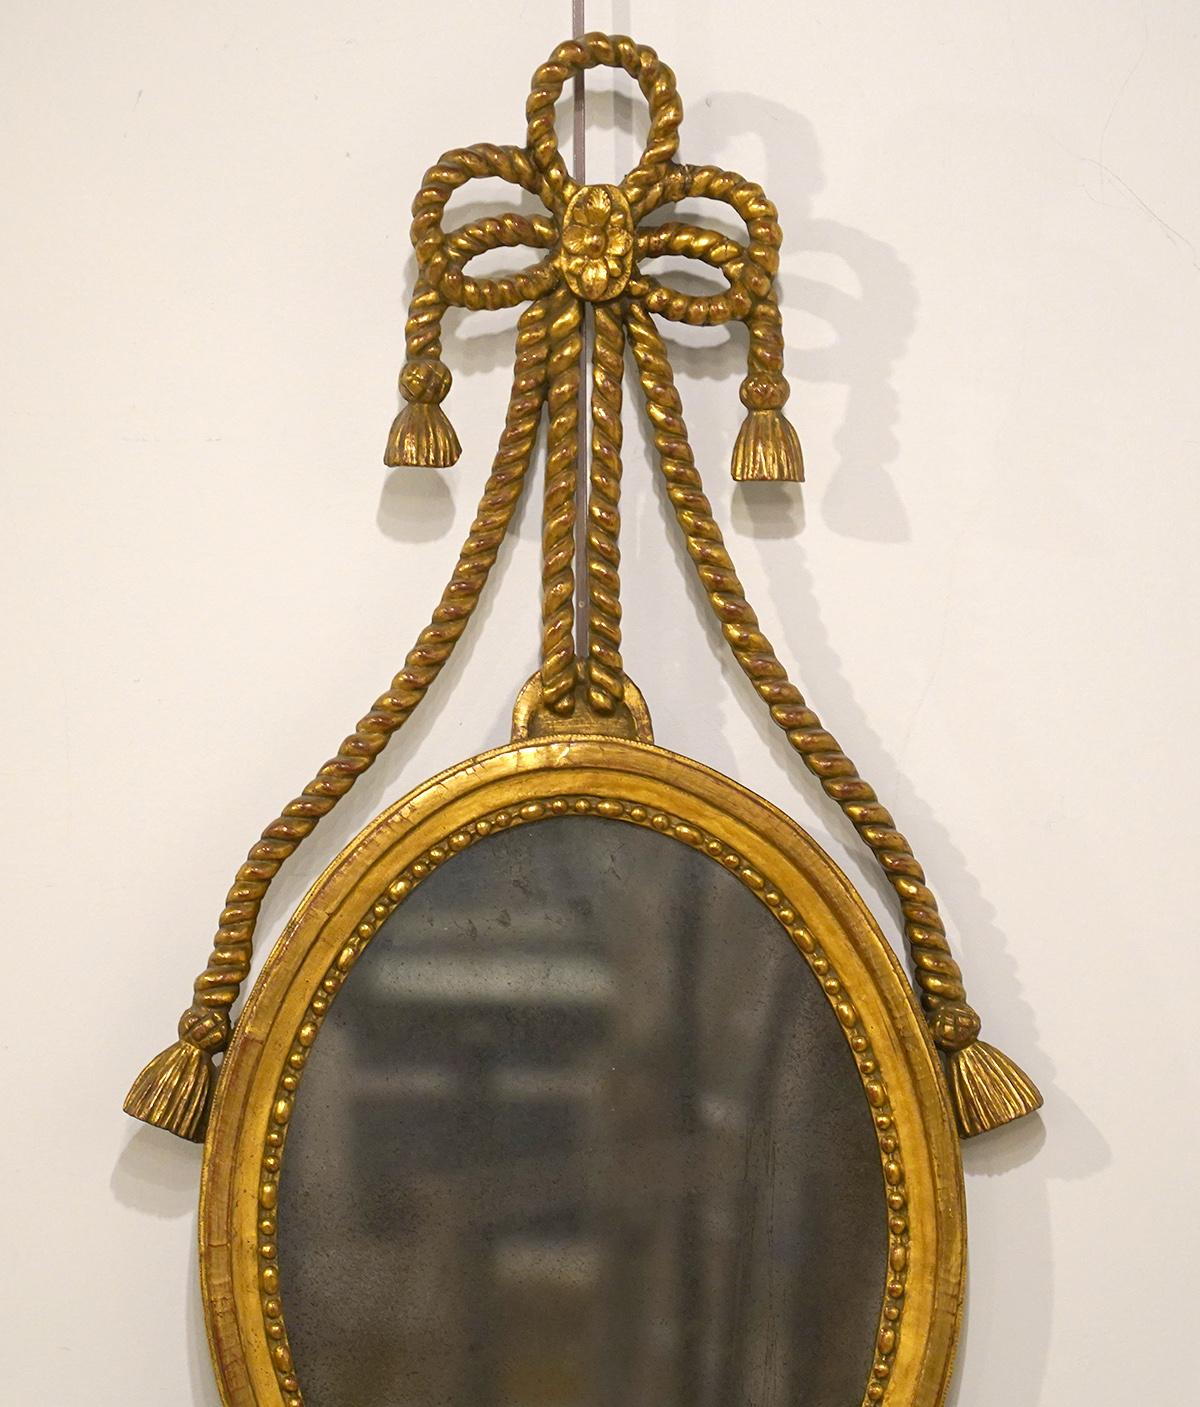 This rather rare Georgian wall mirror features an oval mirror in a beaded molded frame supporting an elegant large bow on the top from which ropes and tassels are gracing the miror frame. The bottom is adorned by ribbons and drapes centering a